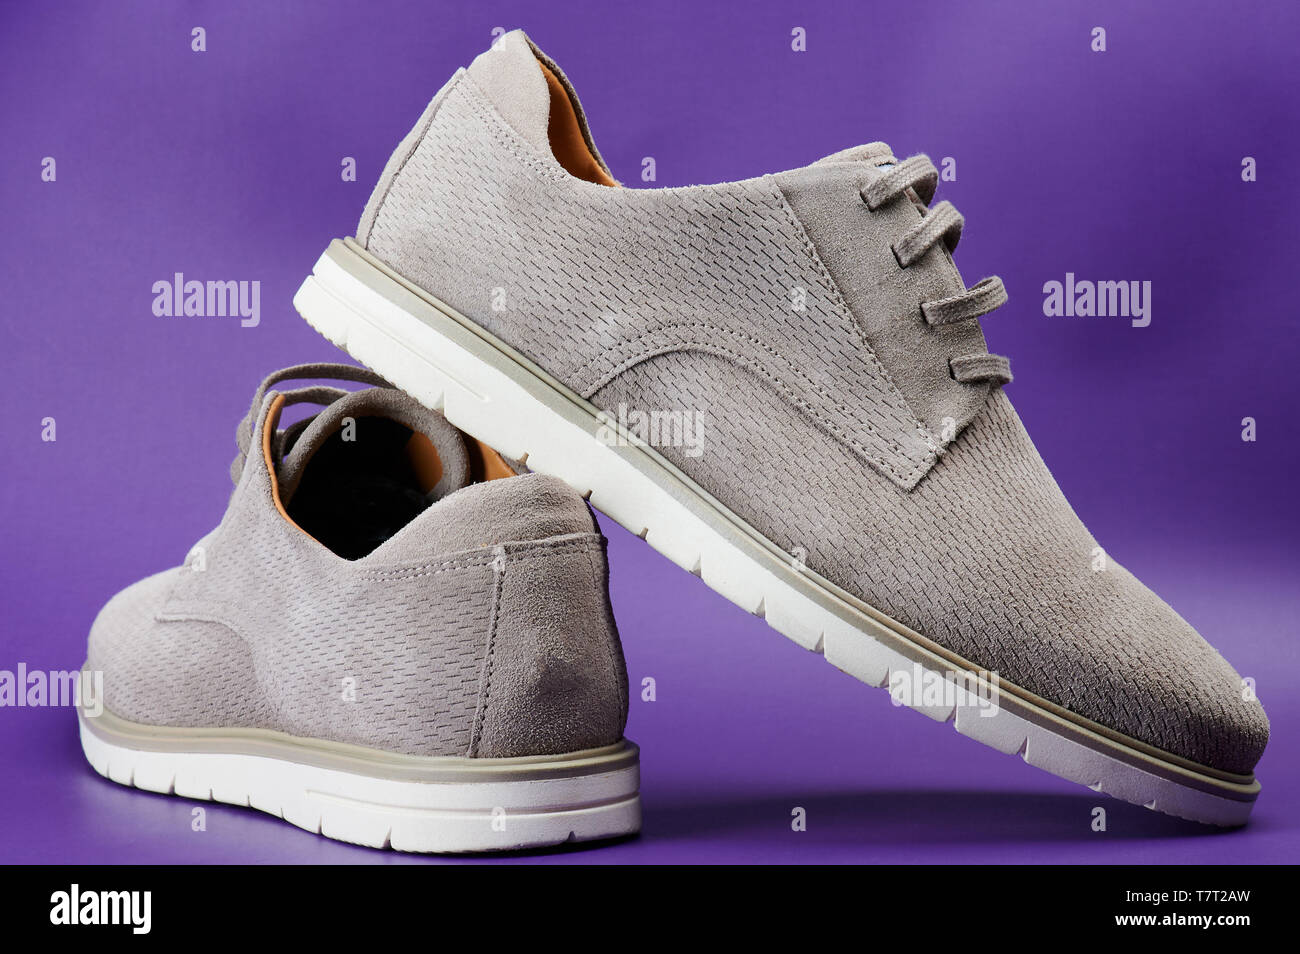 Elegant gray pair of shoes different views isolated on purple background Stock Photo